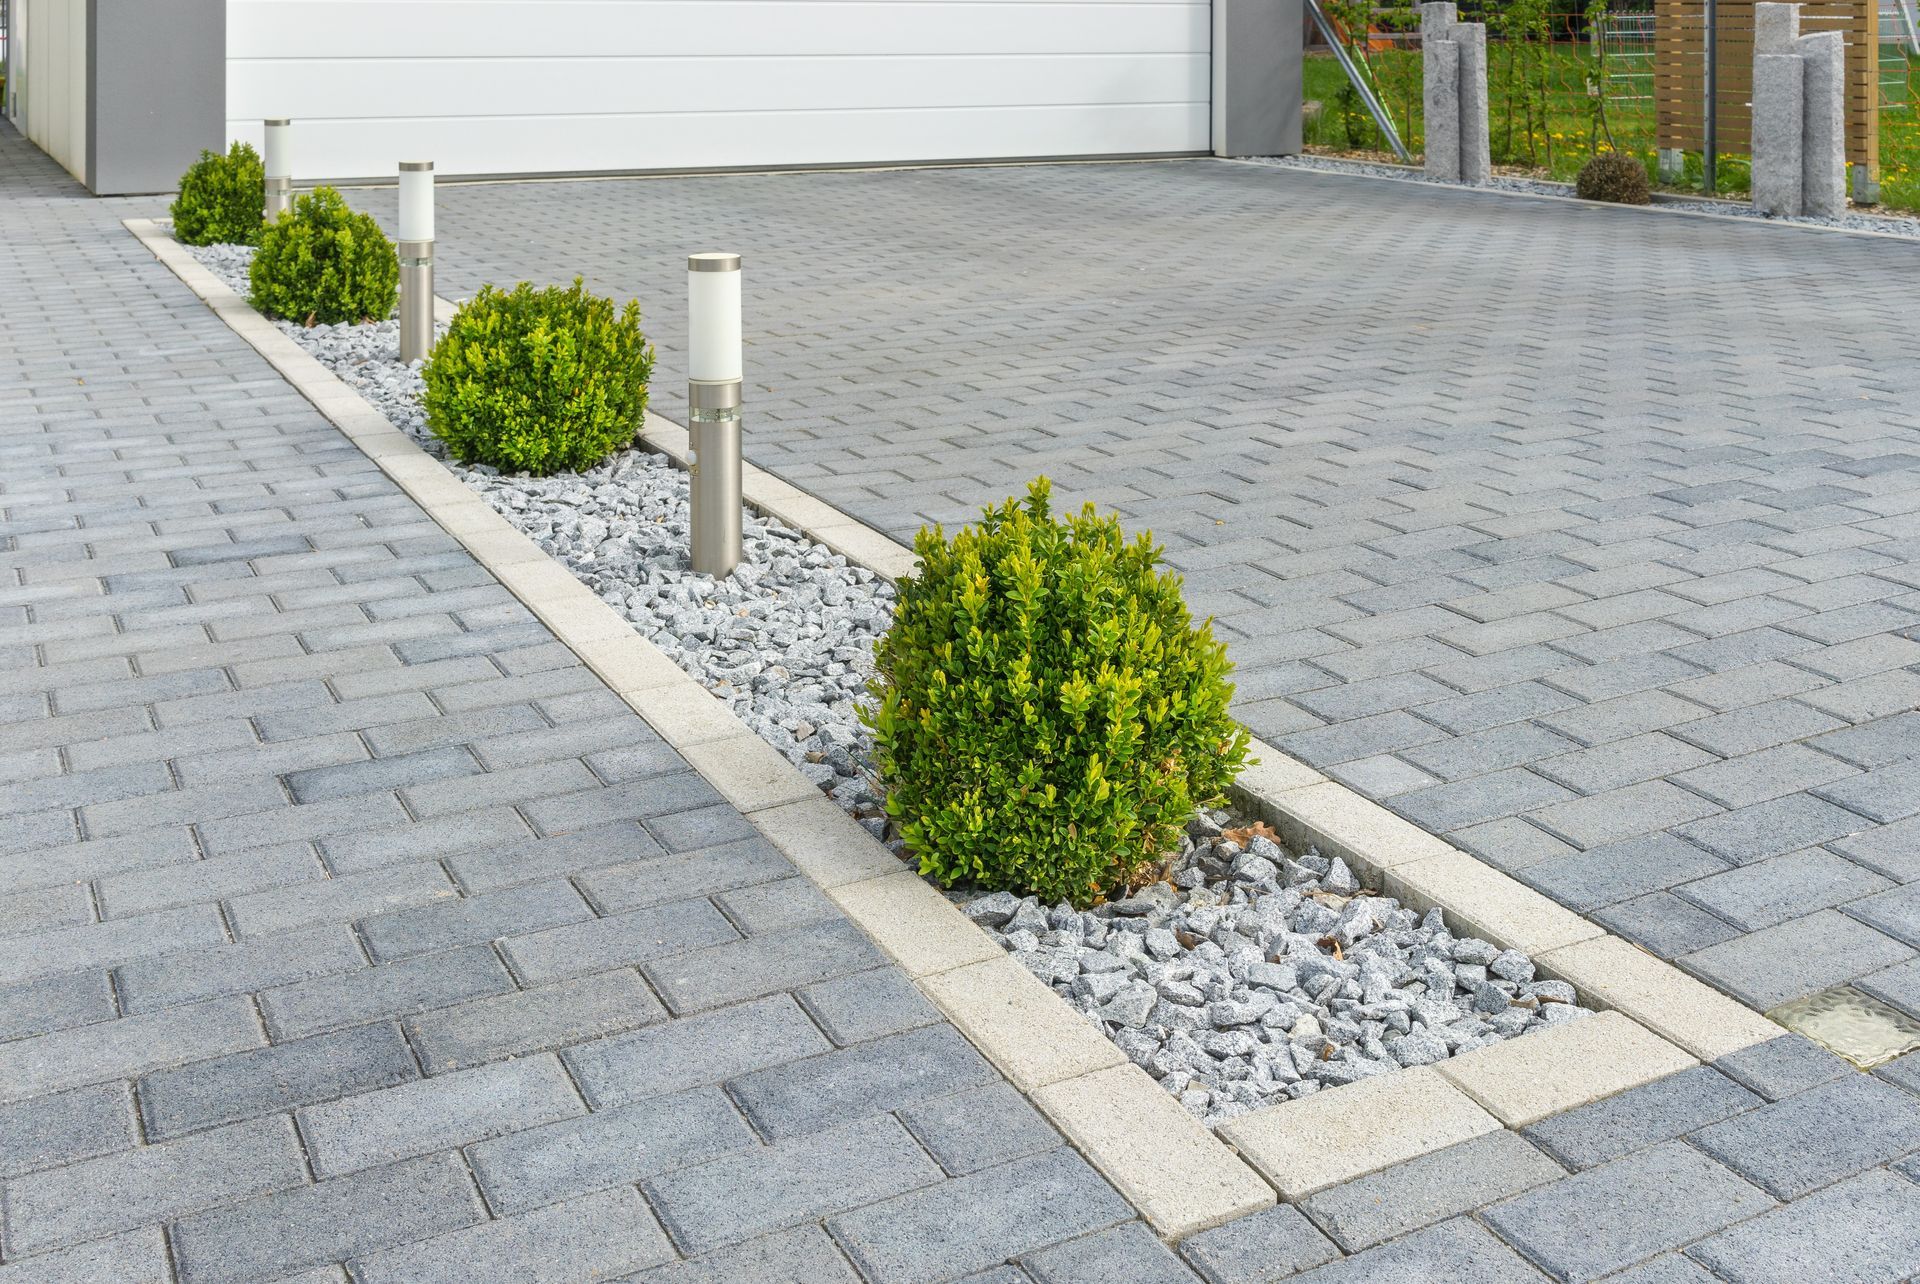 Descover the block paving cleaning services provided by Hedon Exterior Cleaning